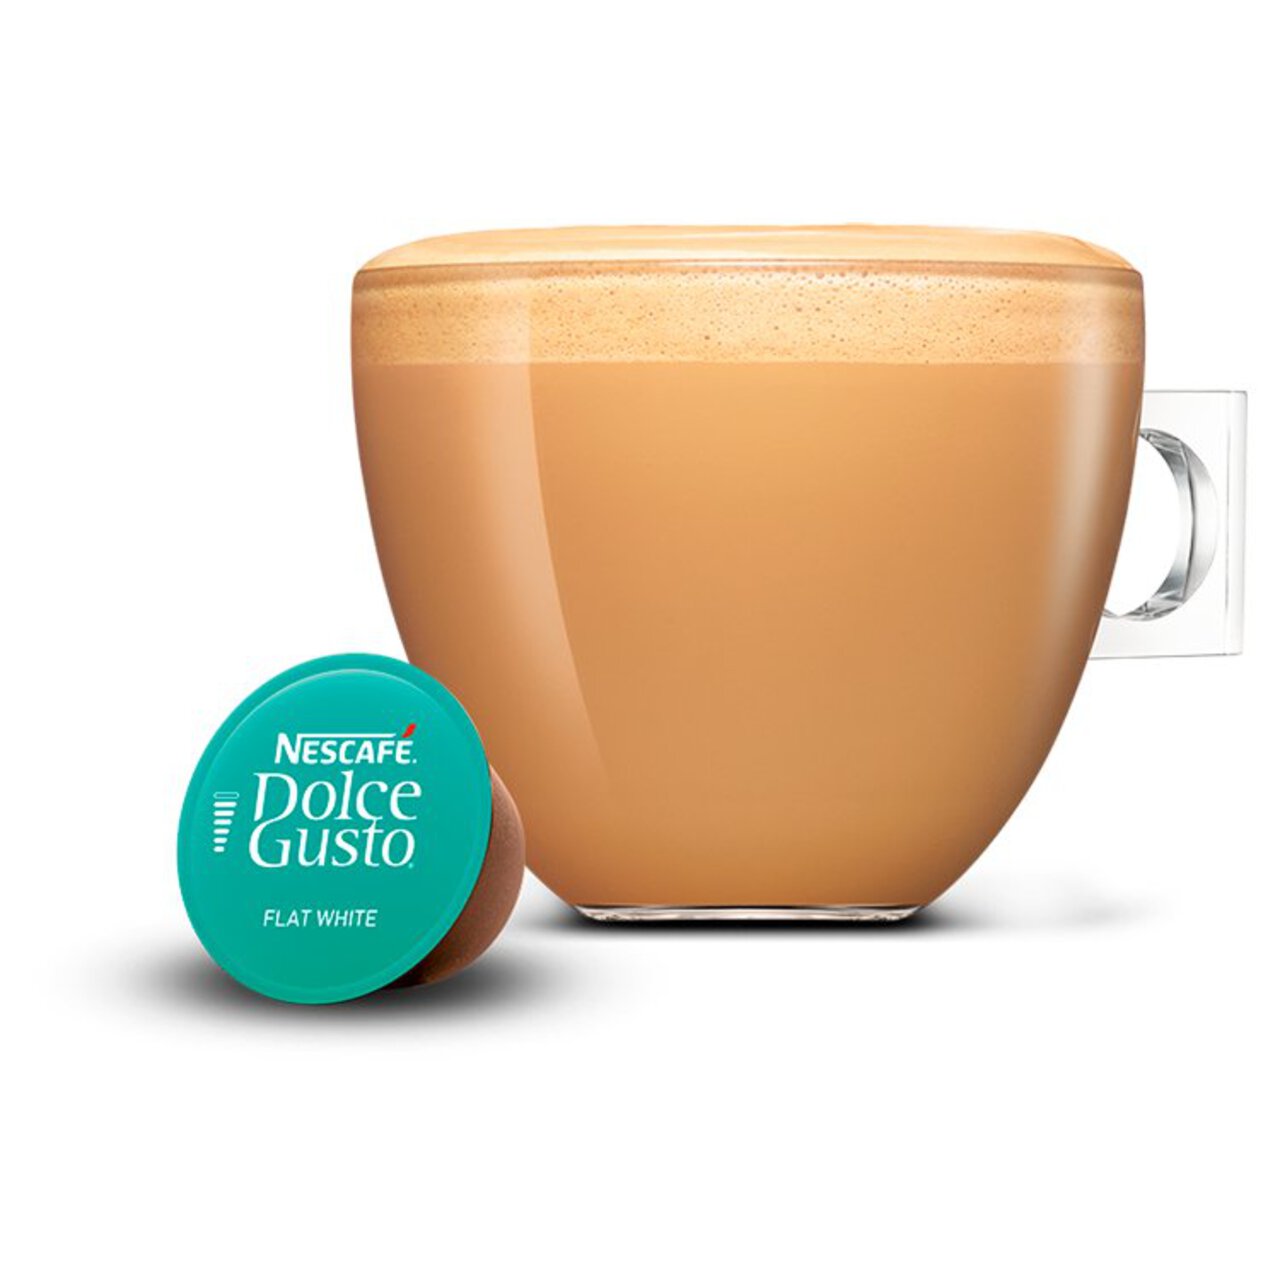 Nescafe Dolce Gusto Flat White Coffee Pods 16 per pack